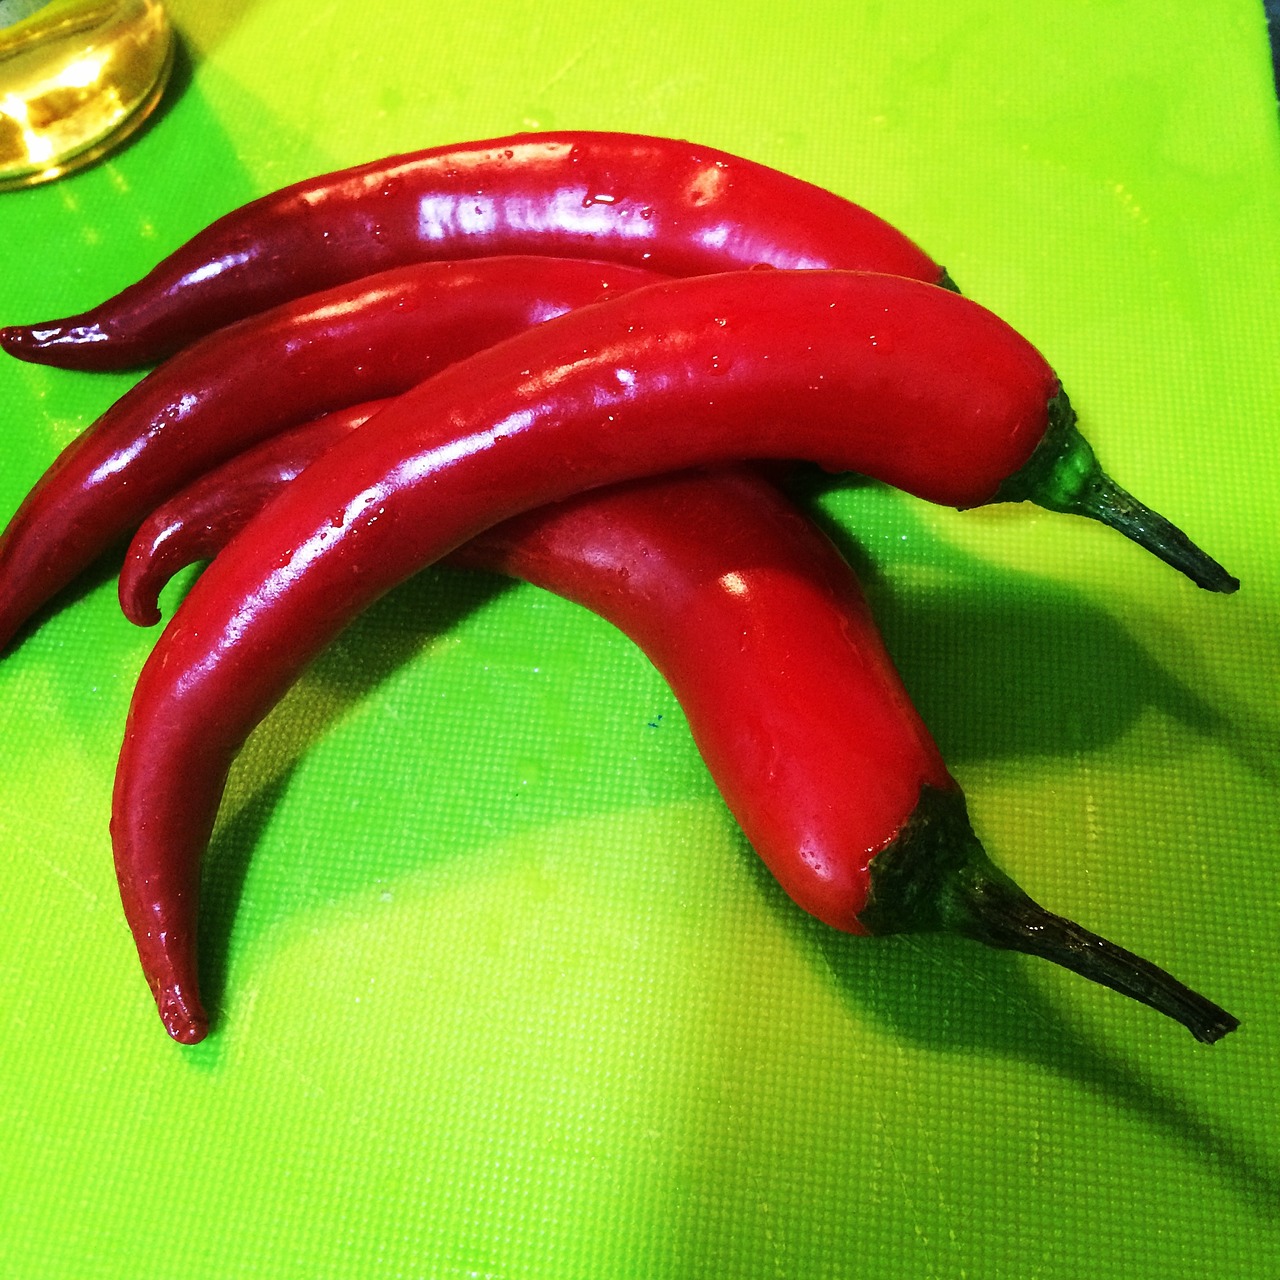 chilli peppers mexico kitchen free photo